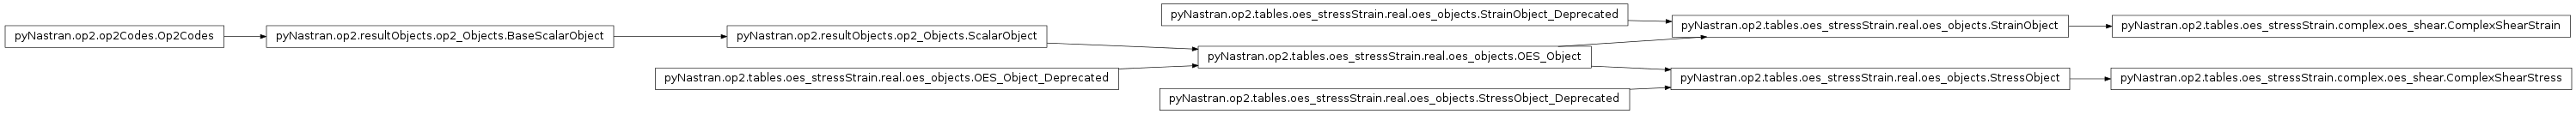 Inheritance diagram of pyNastran.op2.tables.oes_stressStrain.complex.oes_shear